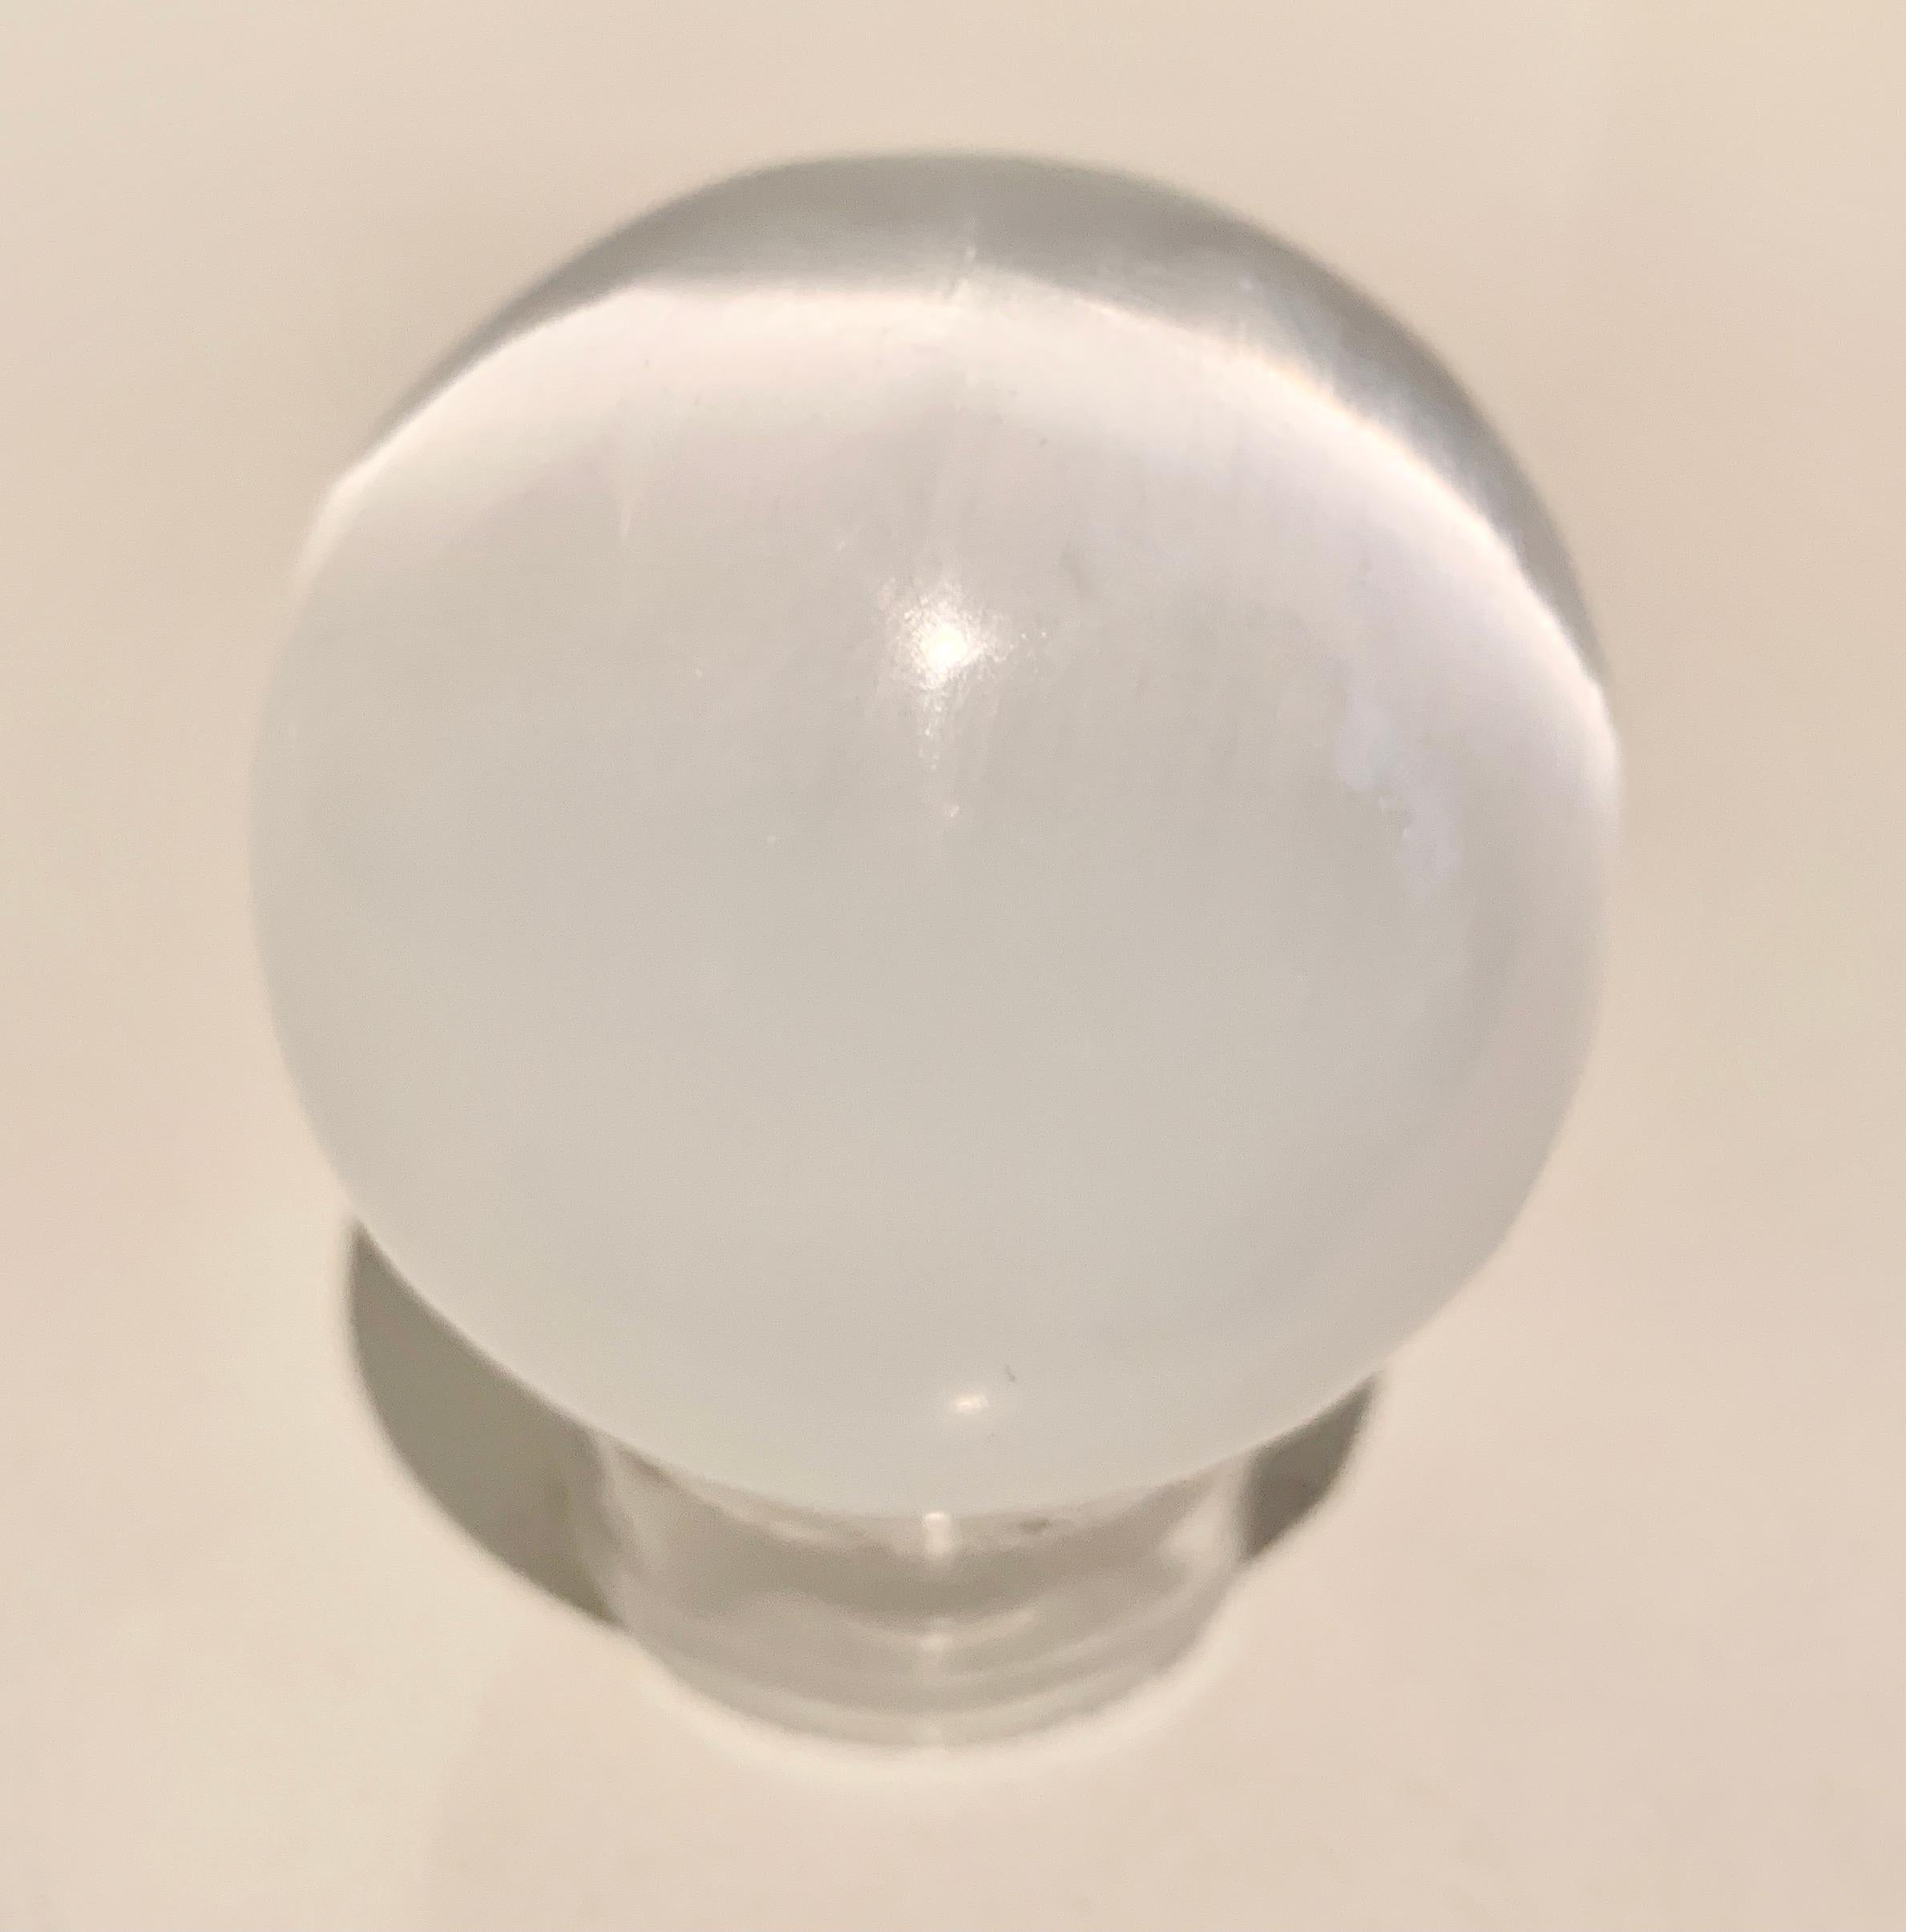 Mounted Iridescent Opaline Sphere paper weight - similar to a tigers eye, yet white, opaque and subtle changes in every direction. A handsome compliment to any desk or shelf.